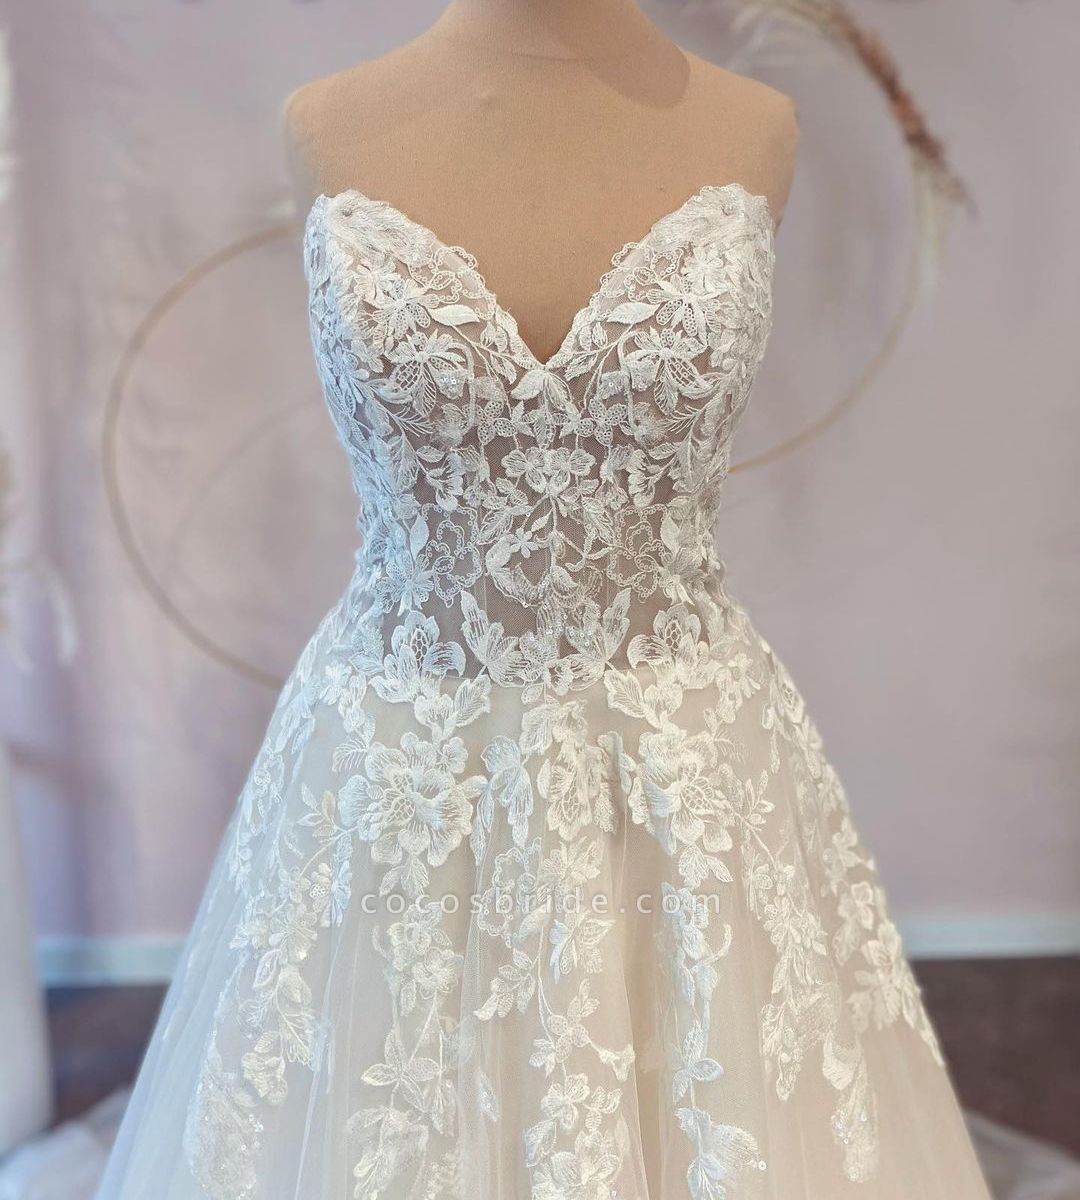 Long A-line Sweetheart Tulle Wedding Dress with Lace | Cocosbride